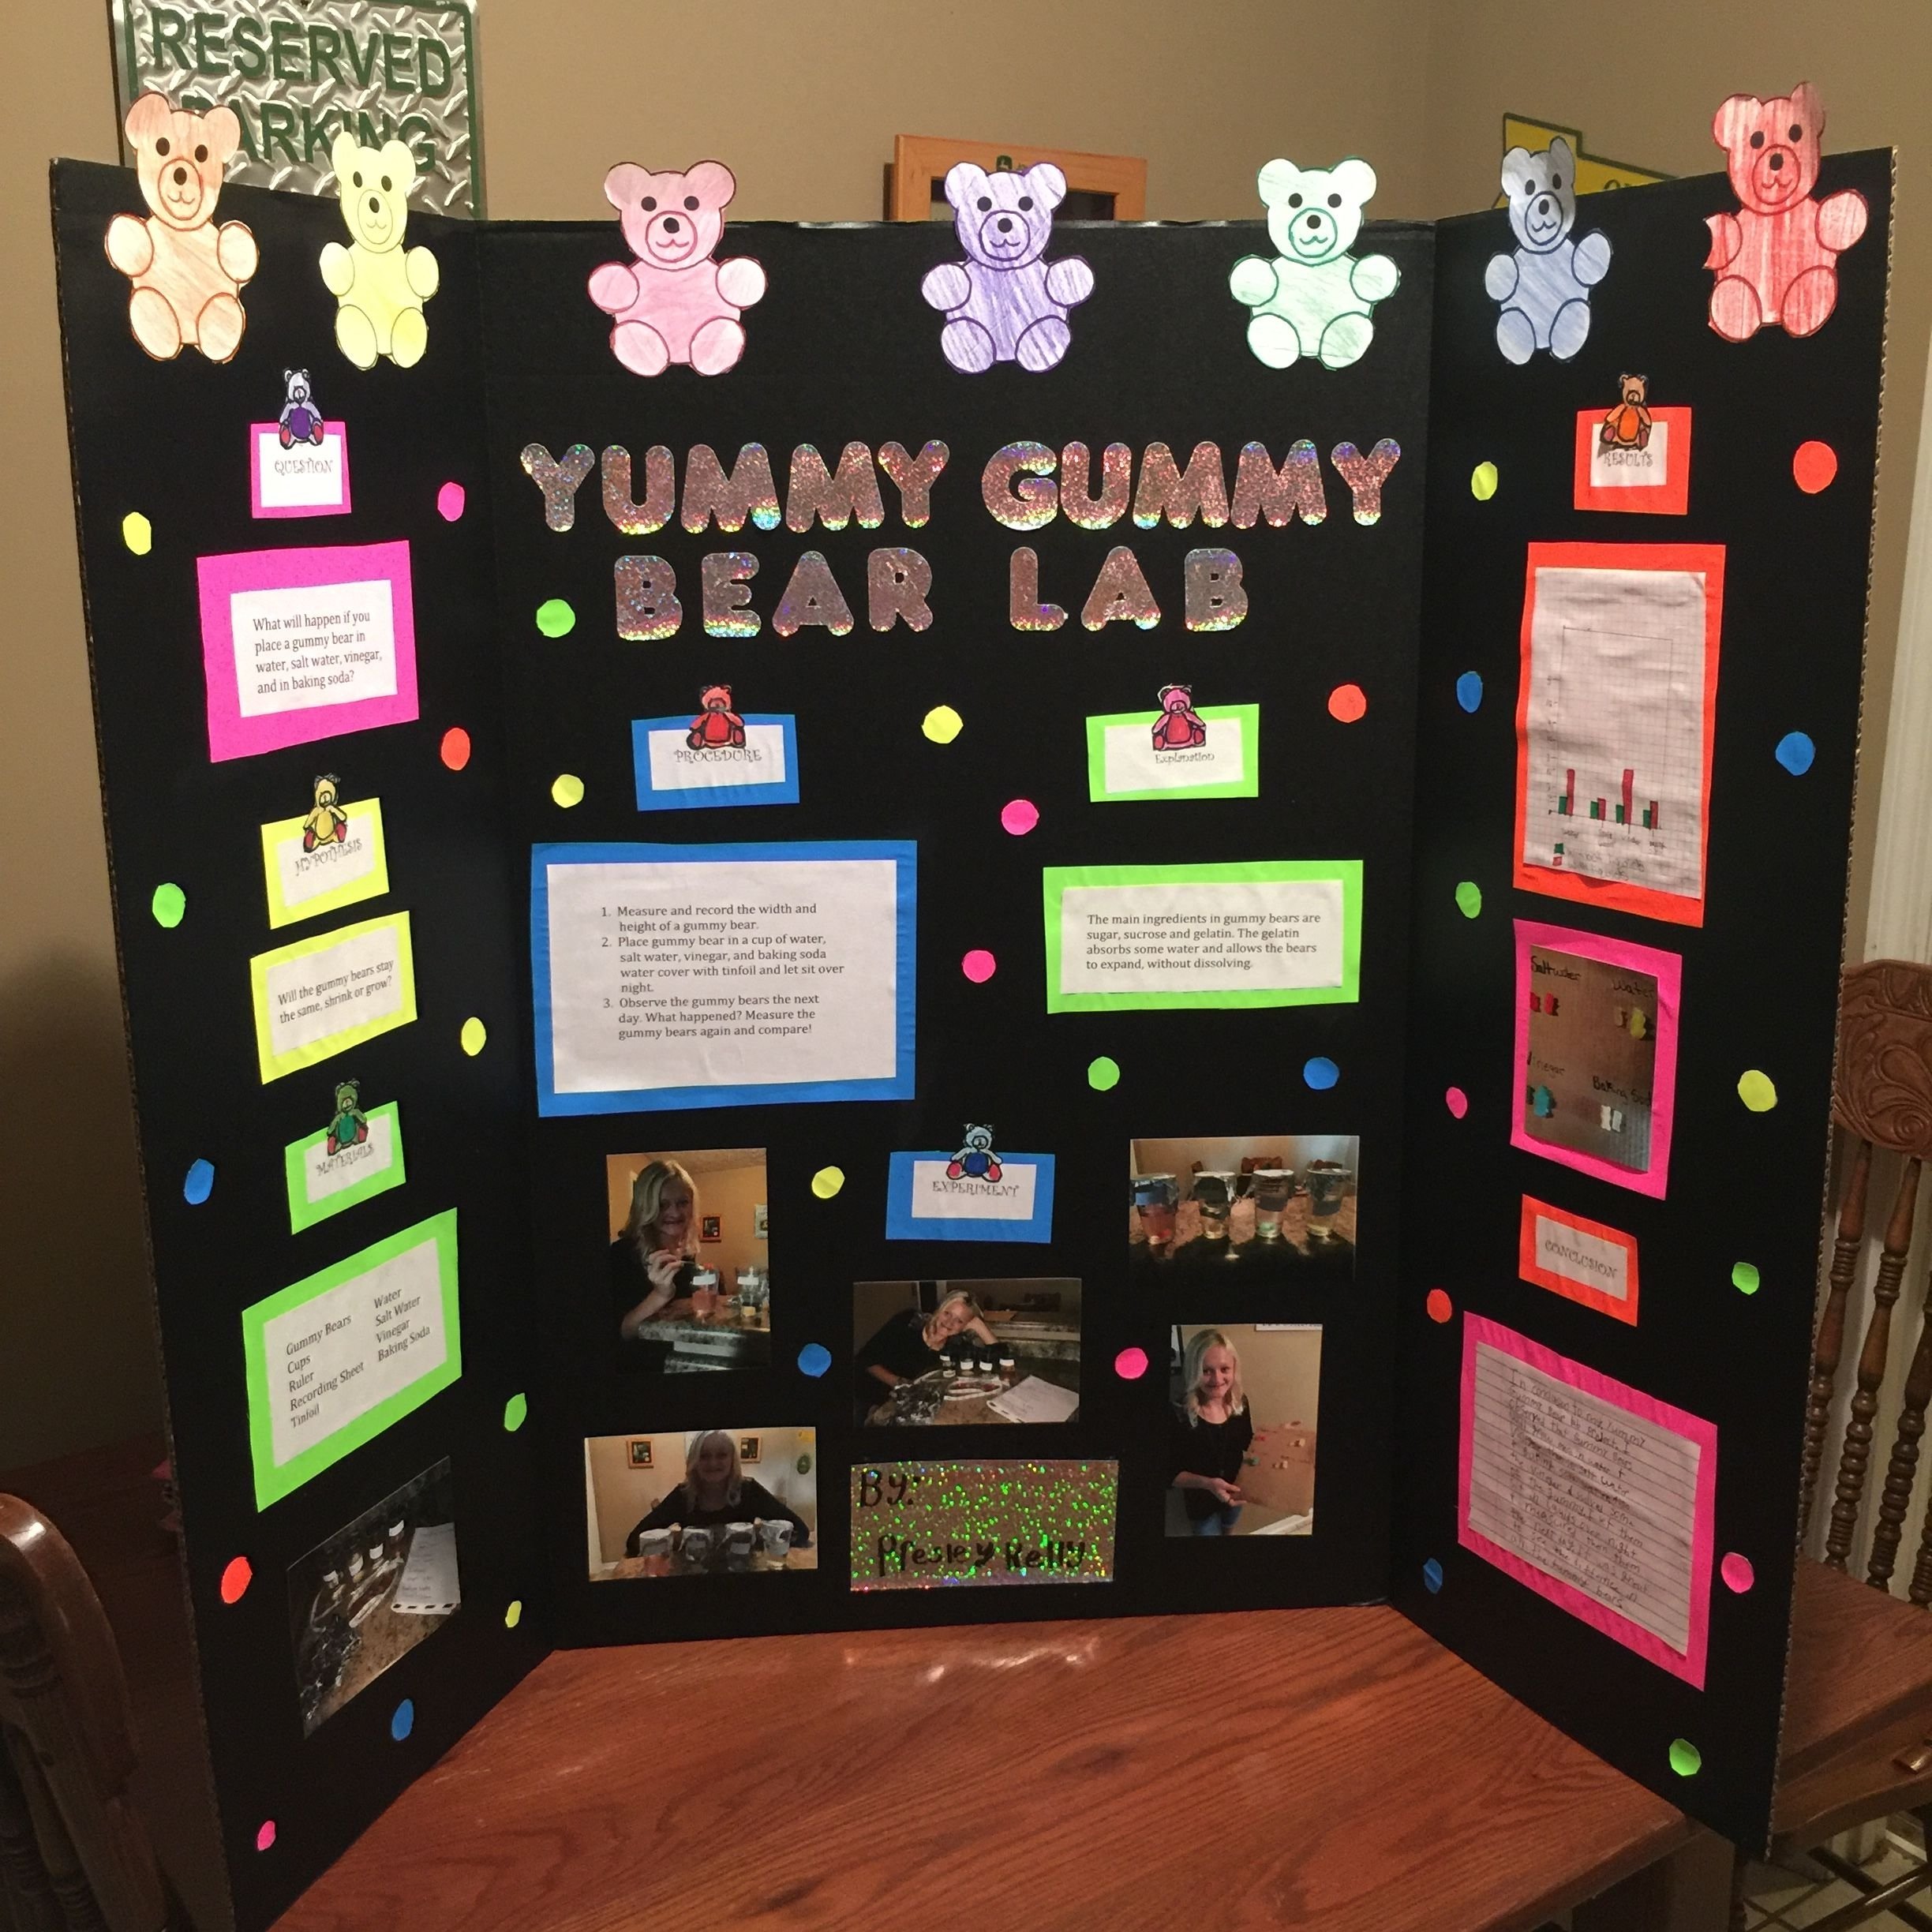 10 Stylish Science Projects Ideas For 4Th Graders our 4th grade science fair project yummy gummy bear lab lots of 4 2022